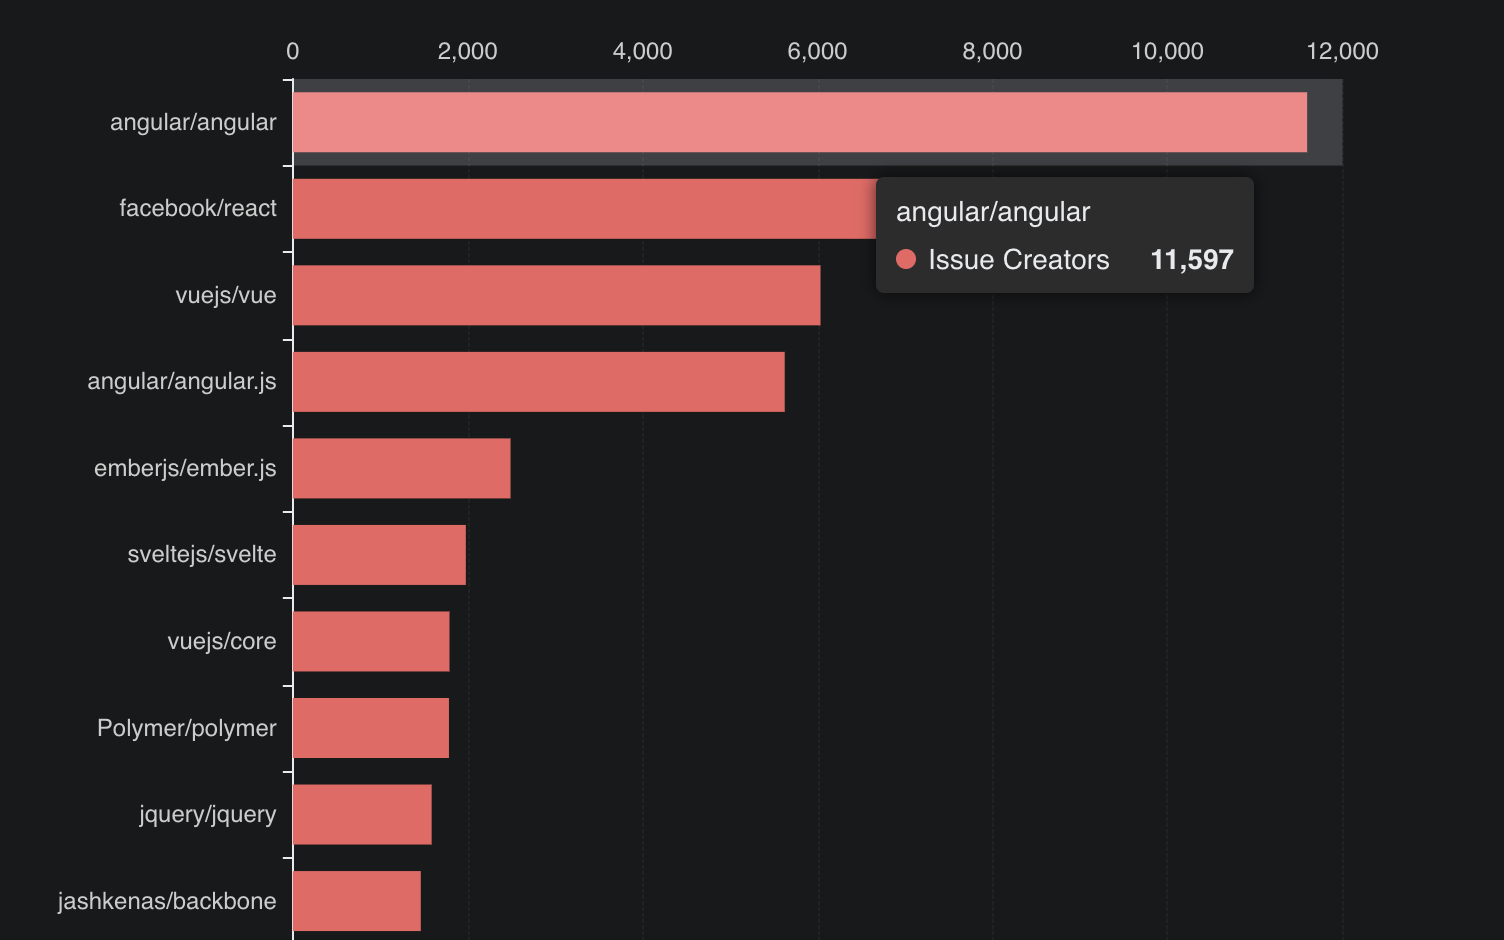 JavaScript frameworks with the most issue creators